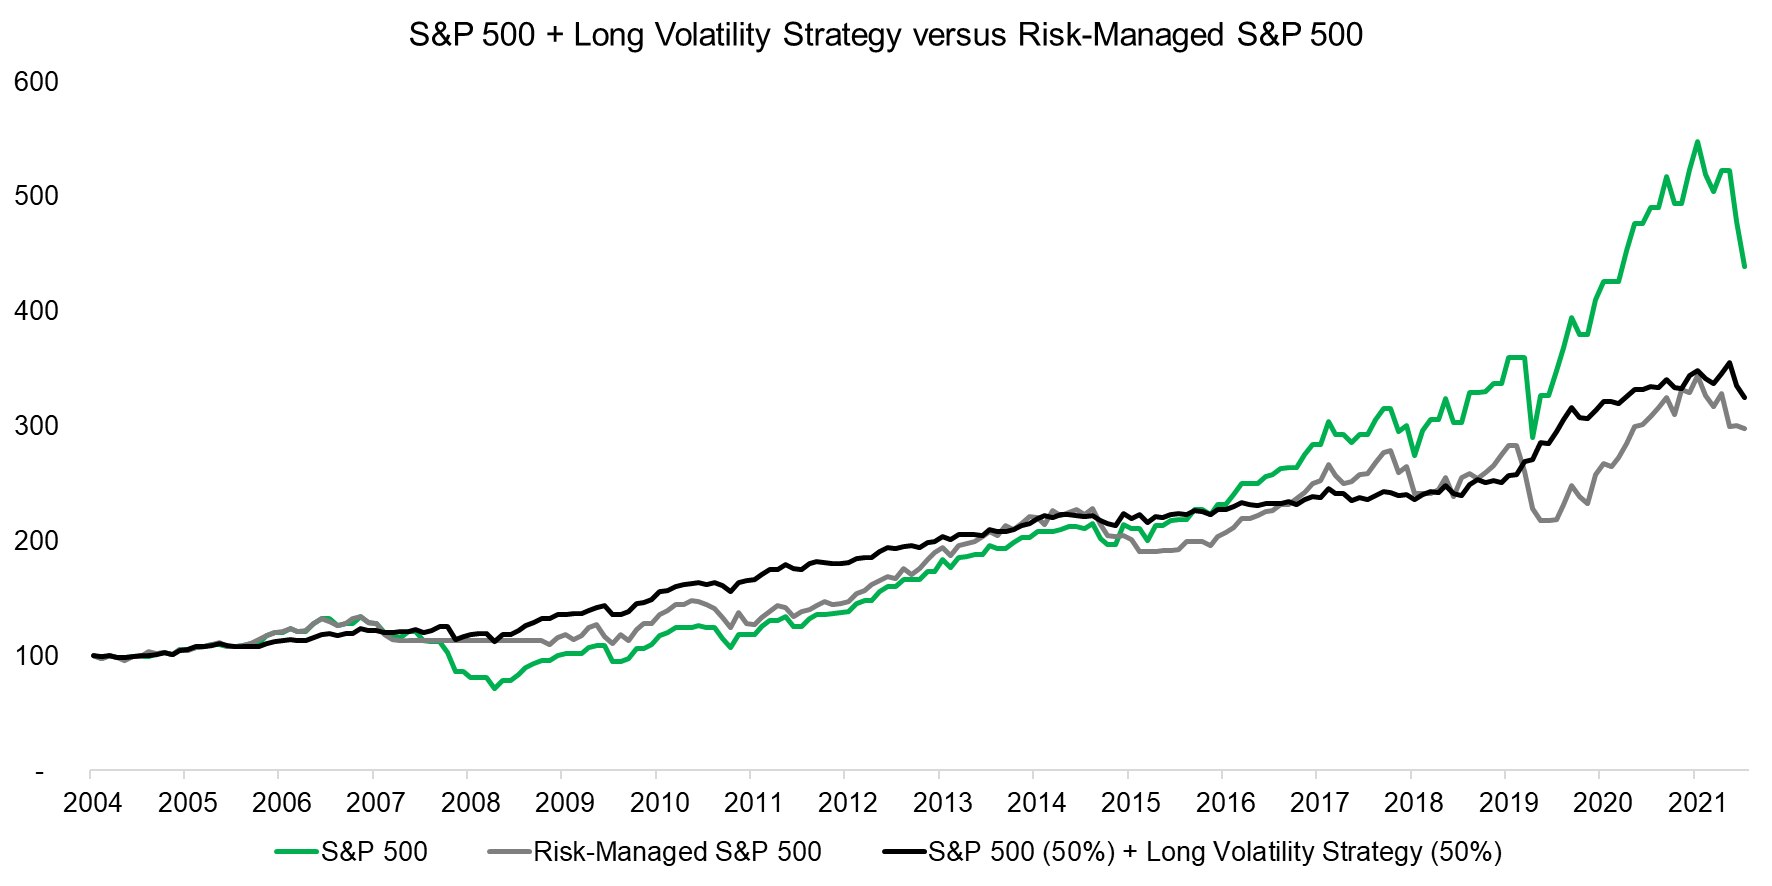 S&P 500 + Long Volatility Strategy versus Risk-Managed S&P 500